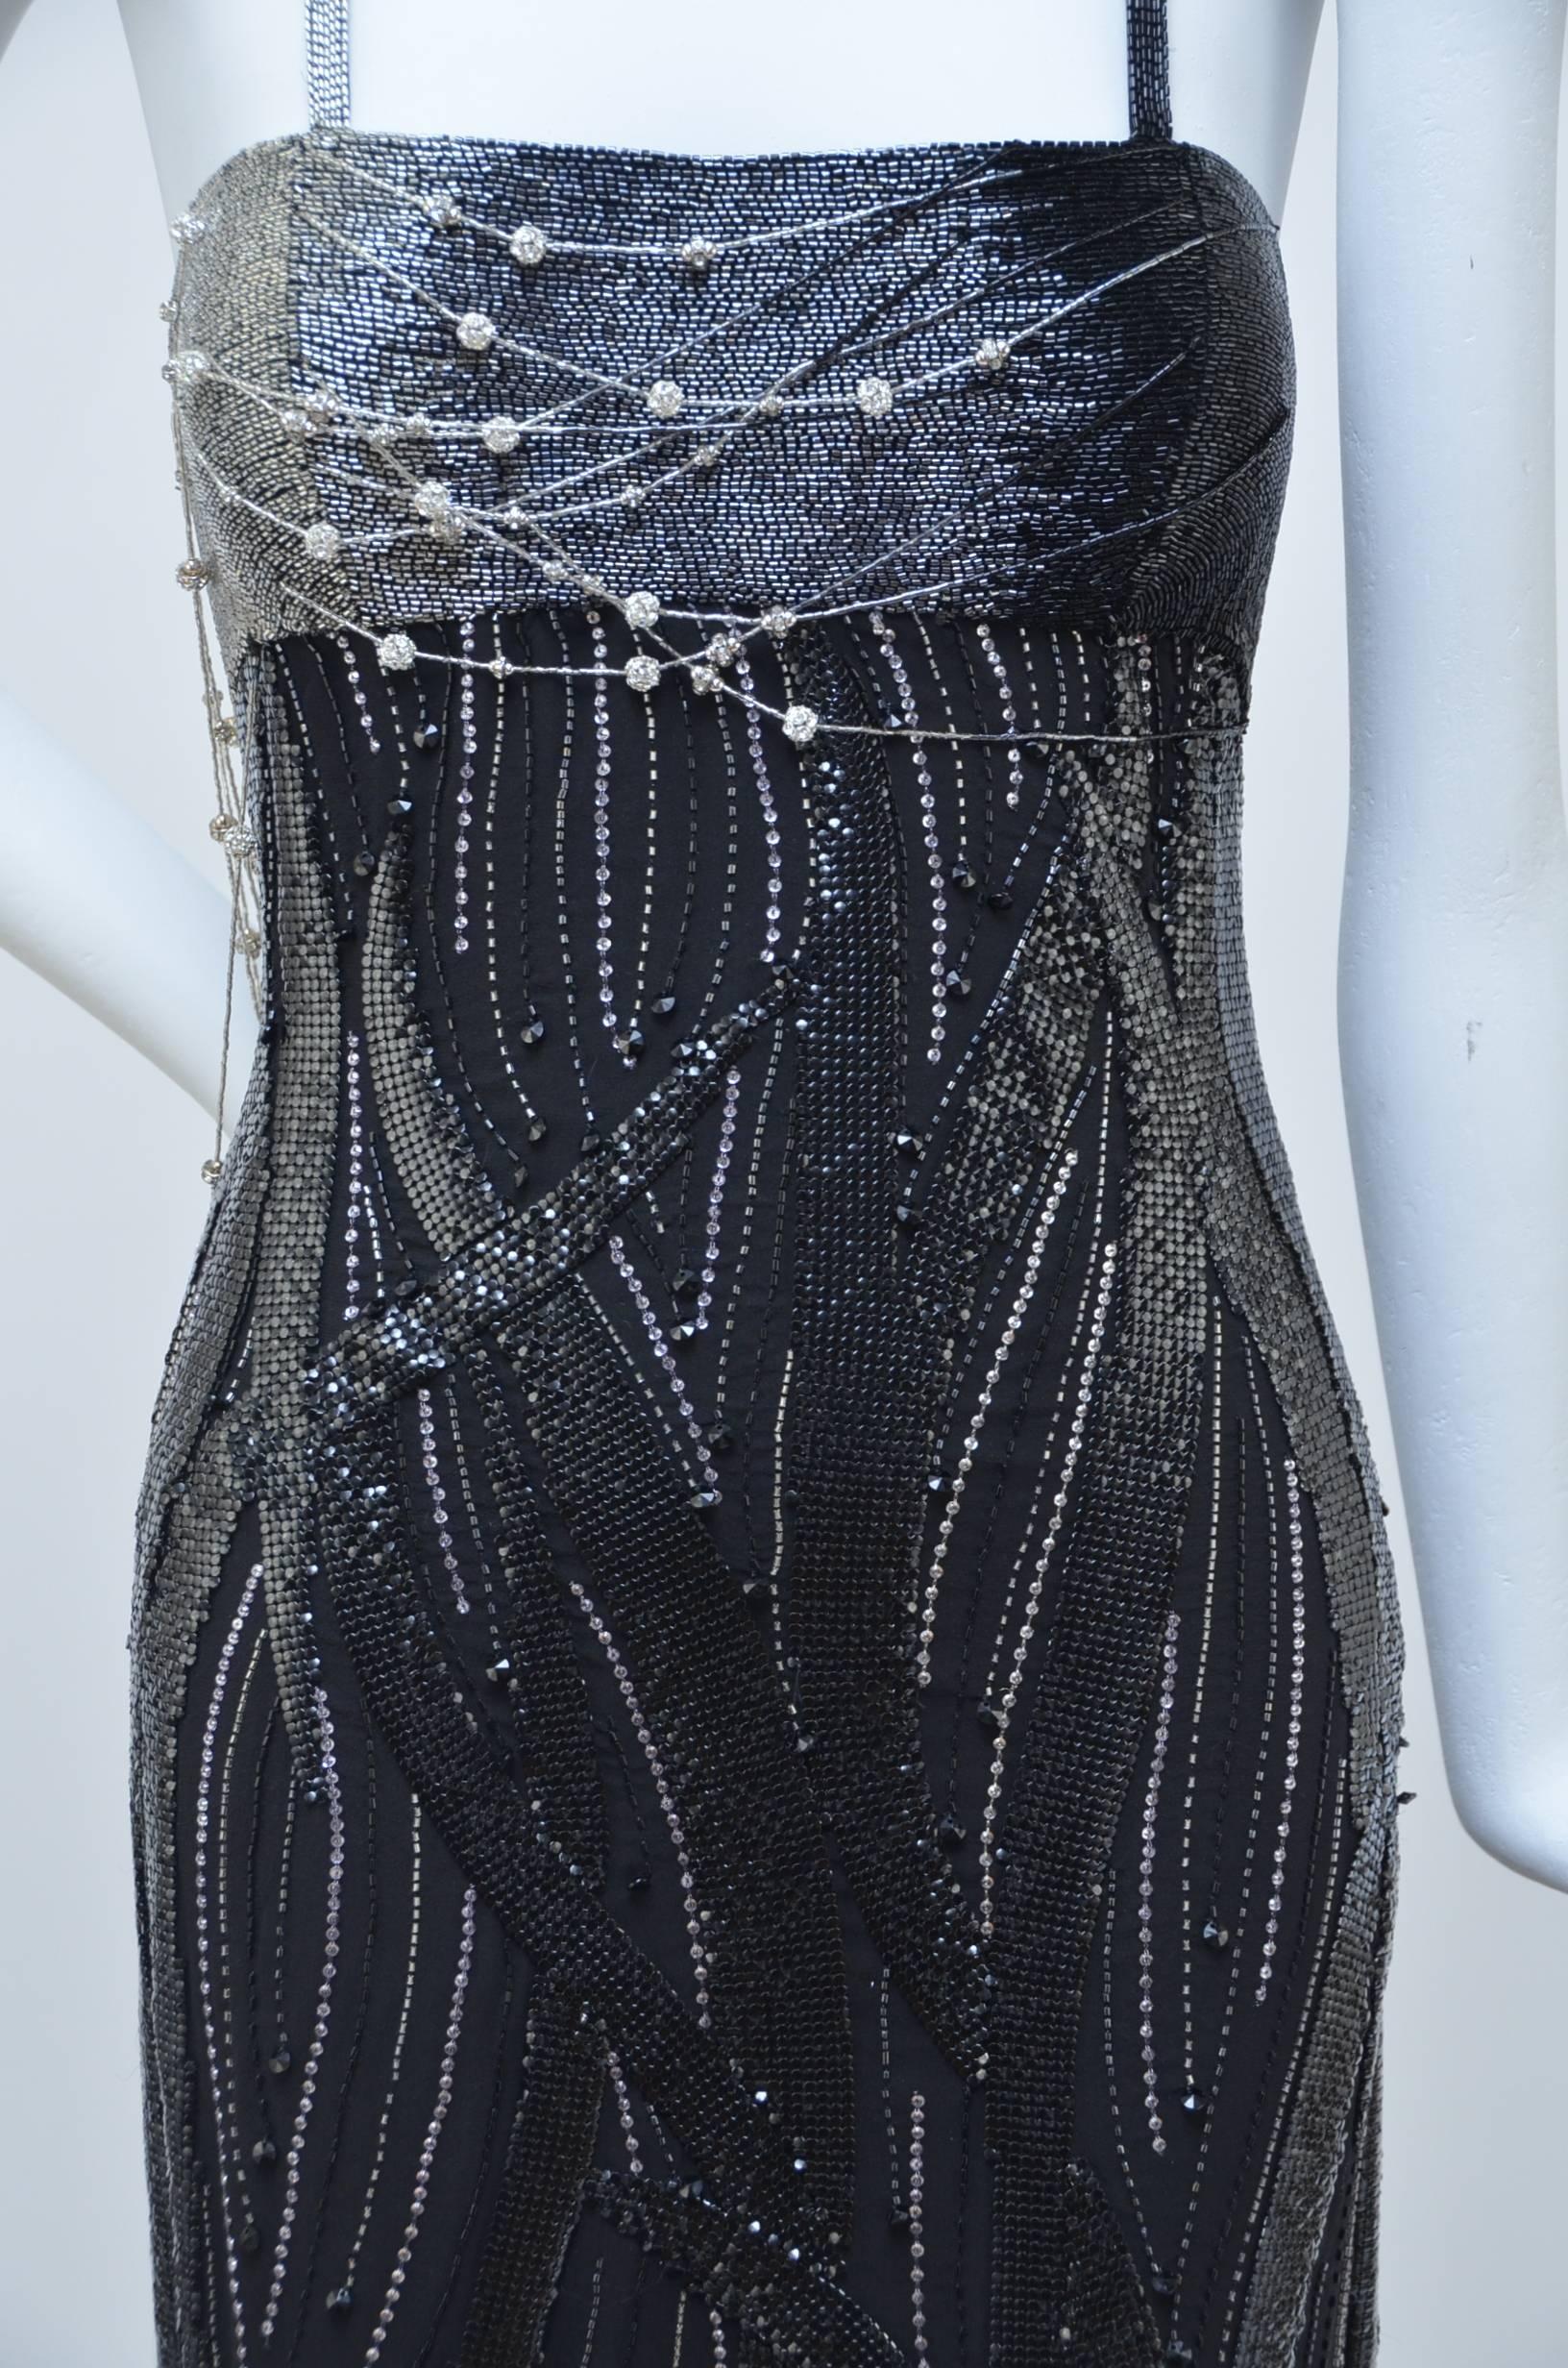 Gianni Versace Atelier  Couture  Dress Perfect For Red Carpet     NEW  1